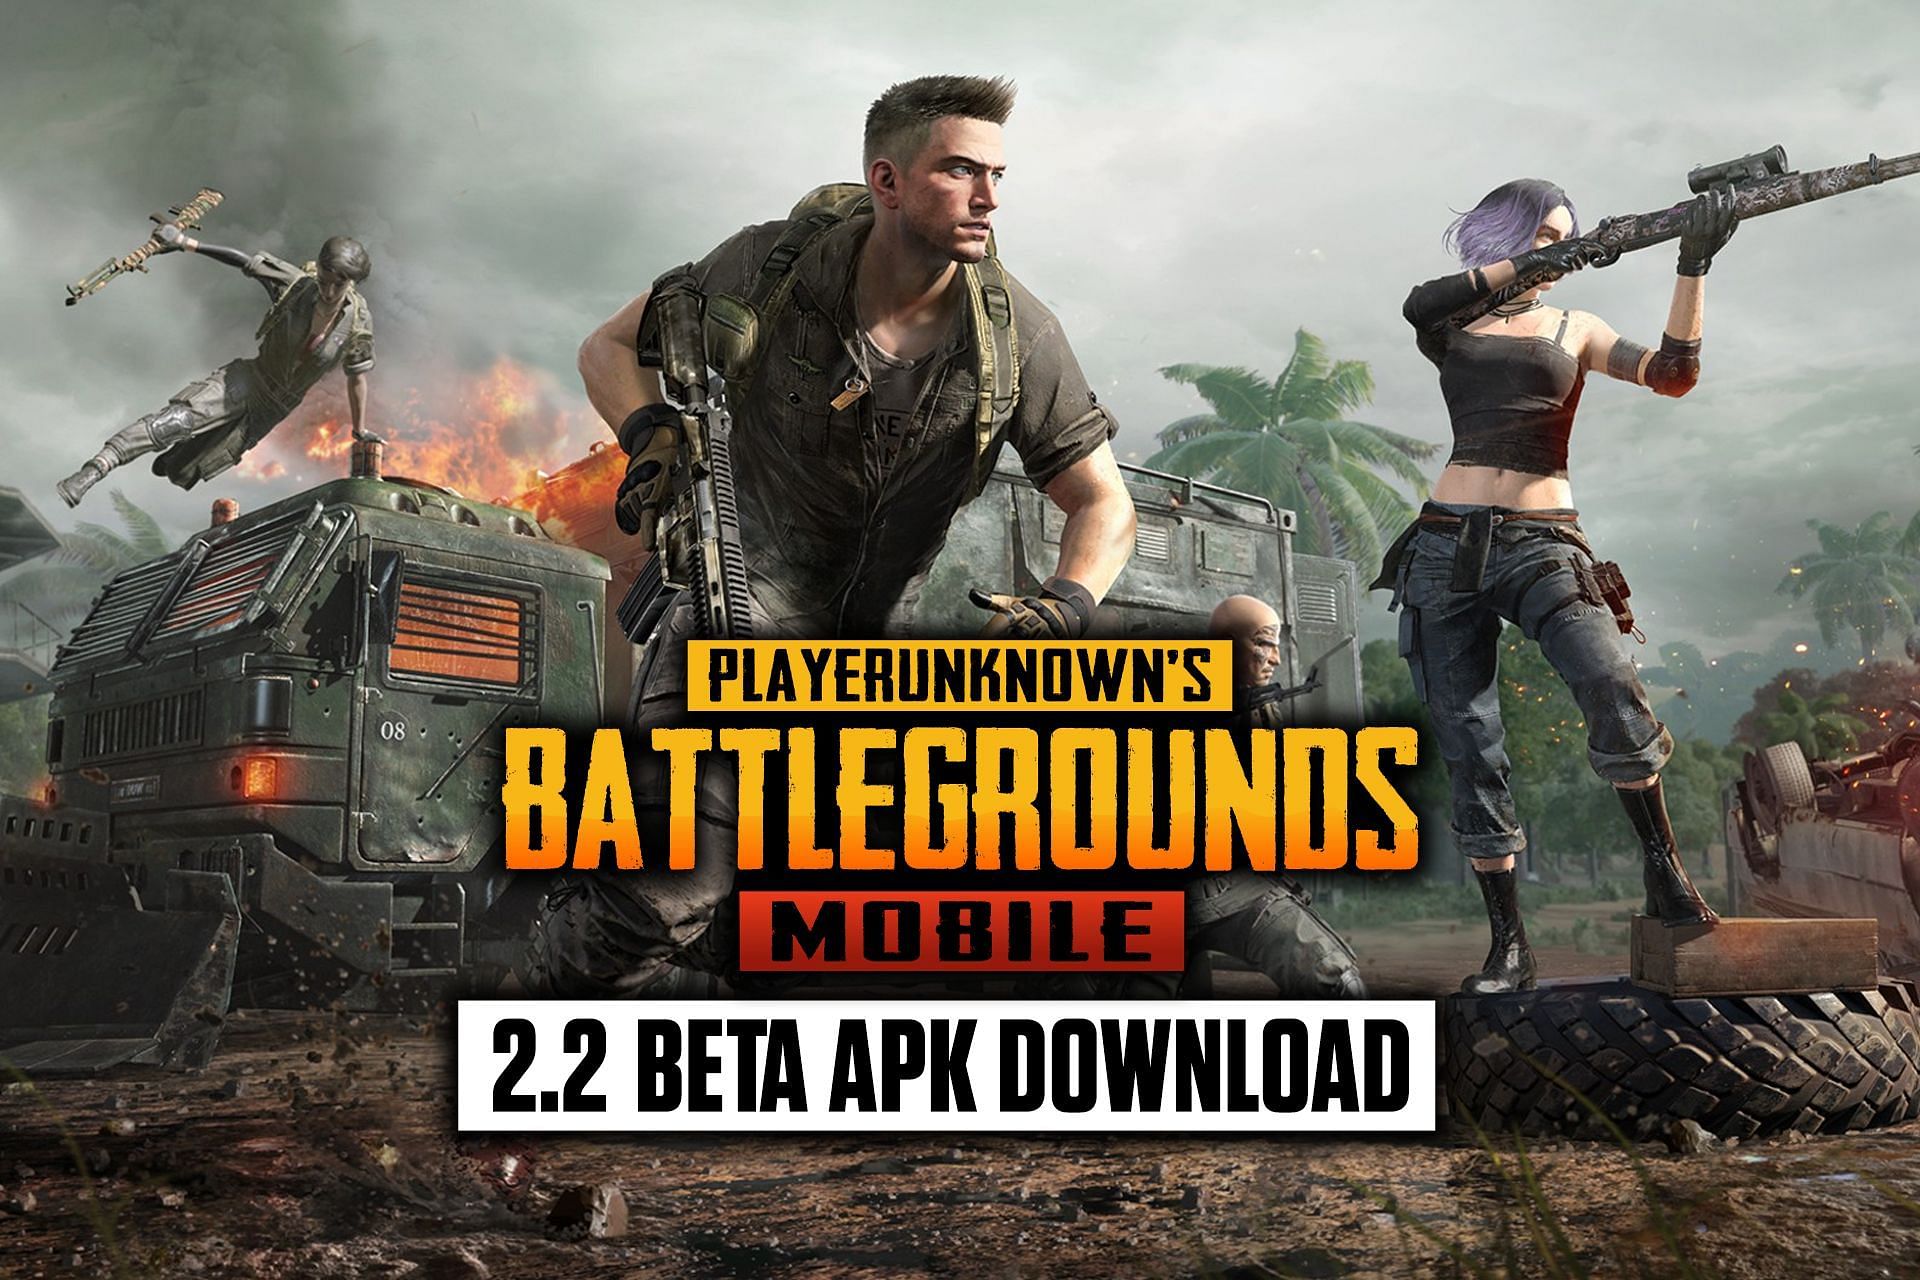 PUBG Mobile 2.2 beta is now available for download (Image via Sportskeeda)